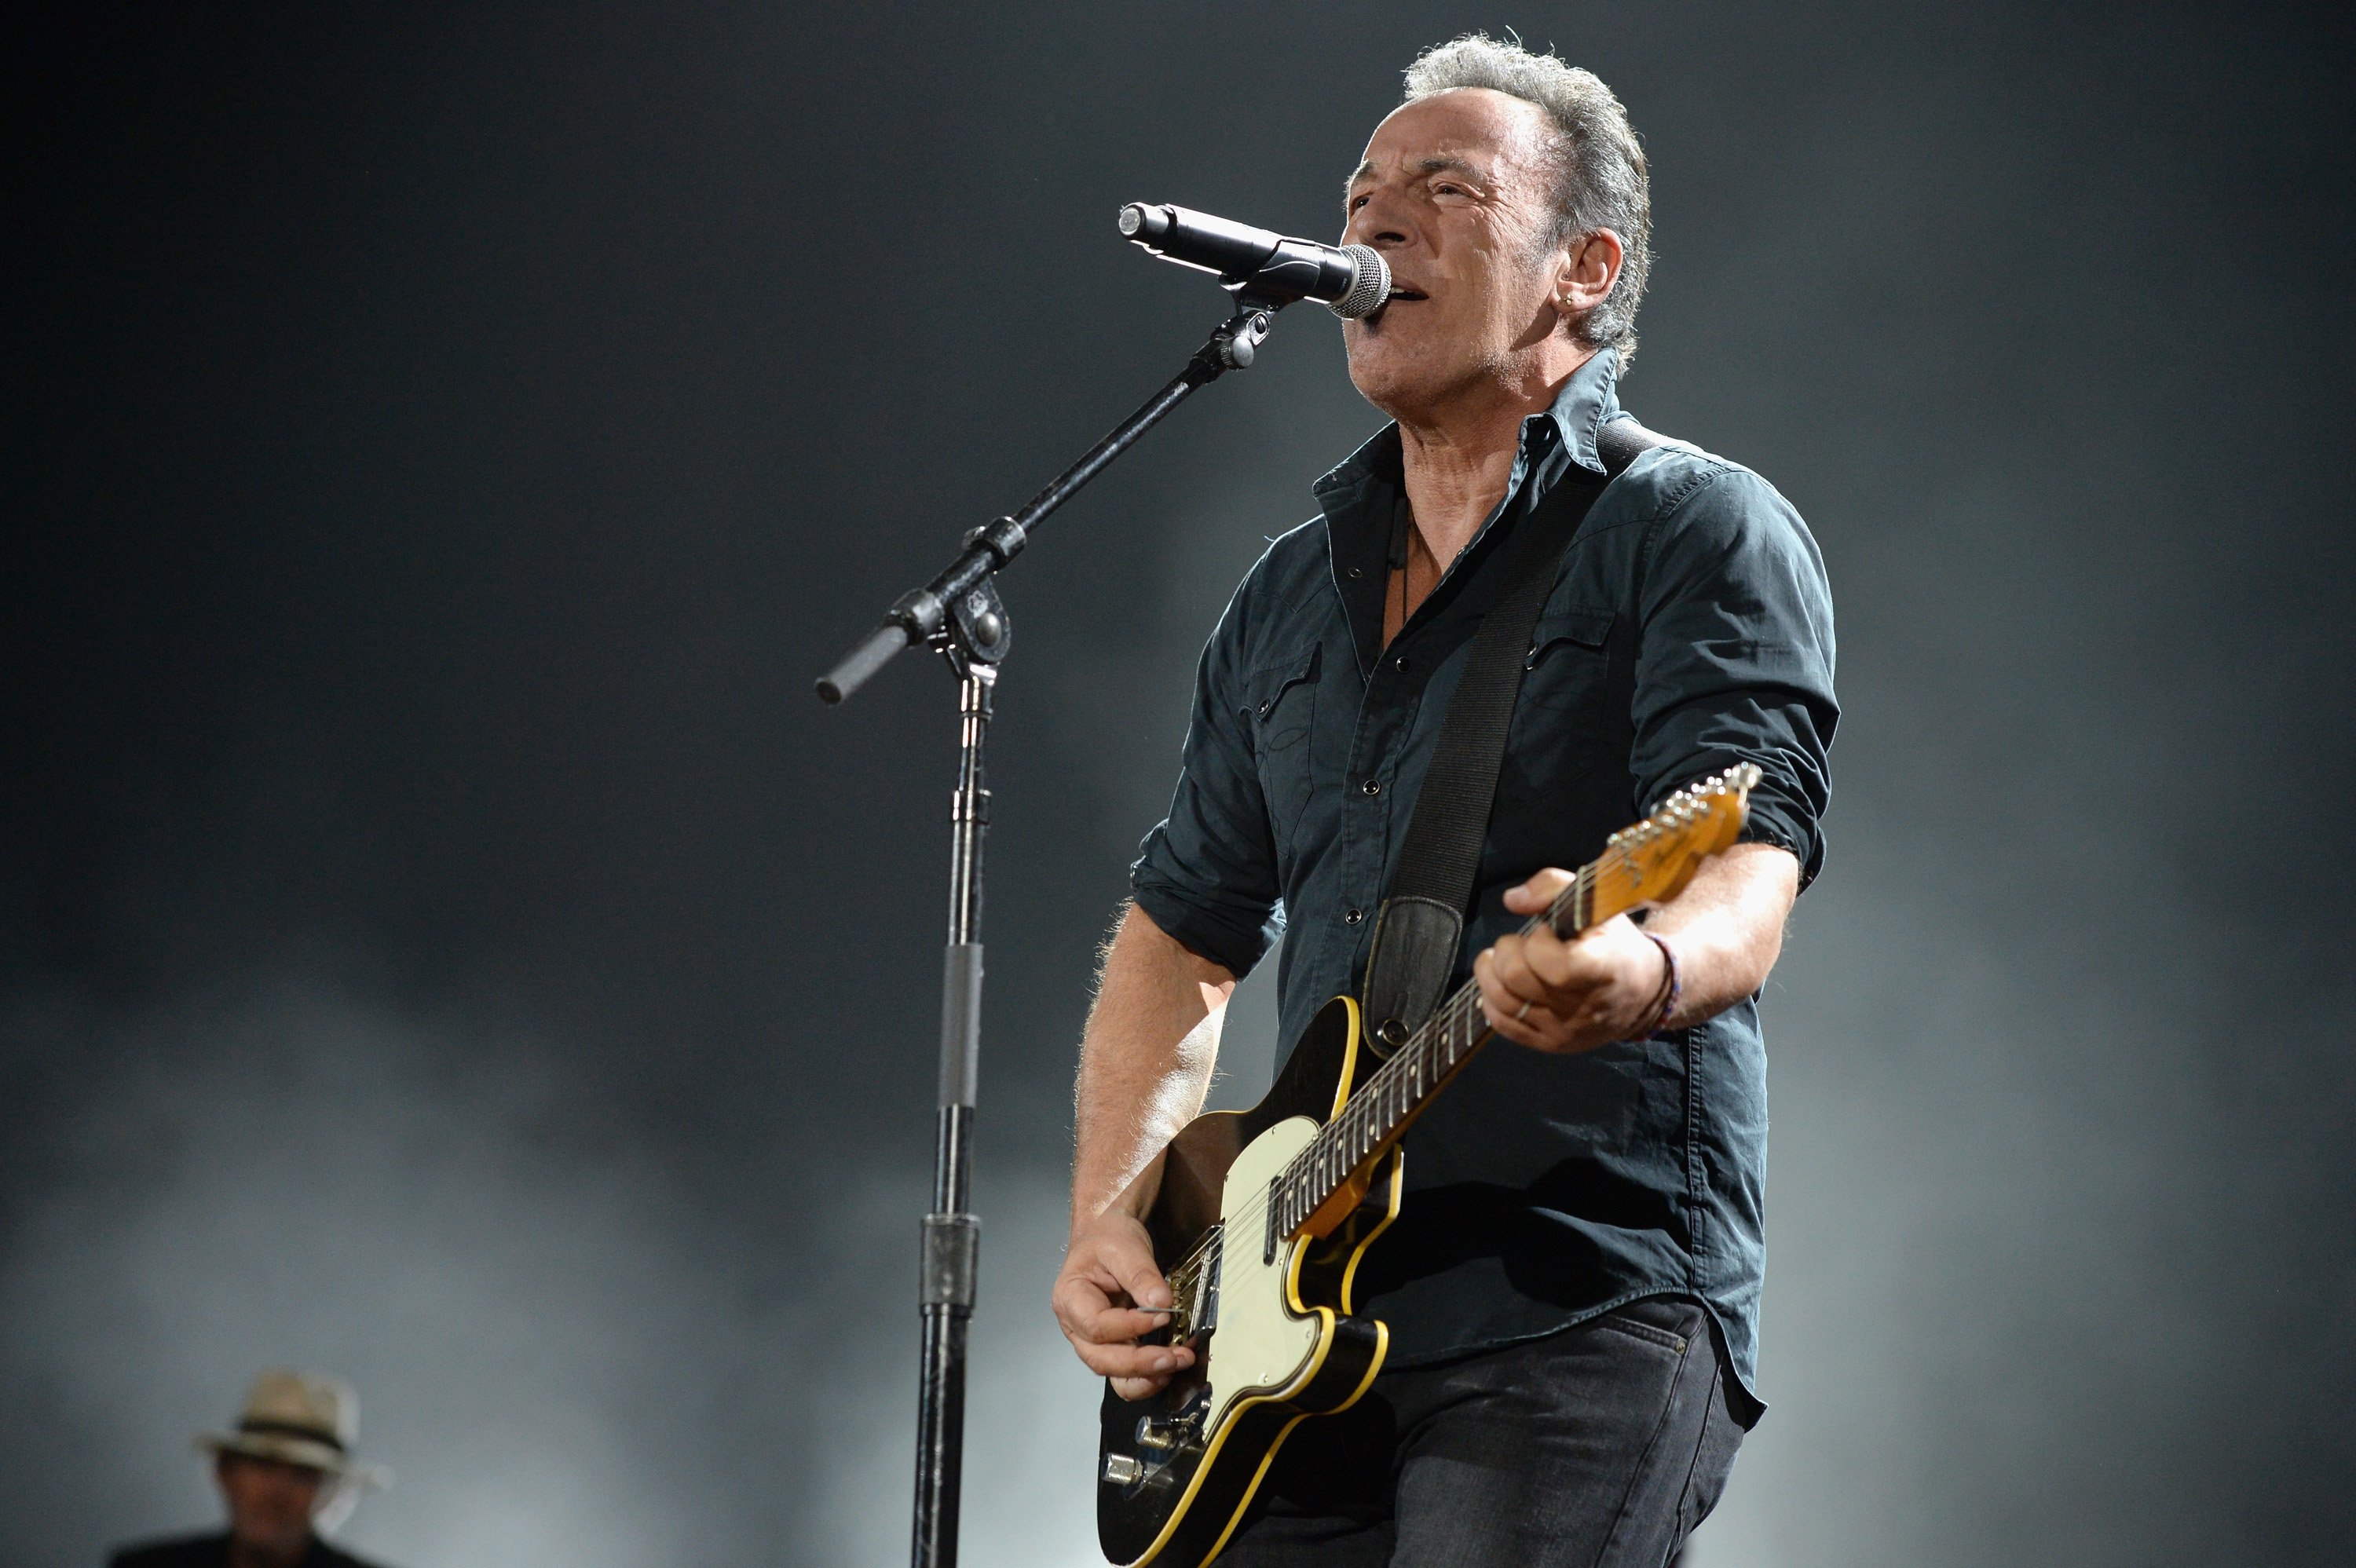 Bruce Springsteen performs at the MusiCares Person of the Year Gala for Bob Dylan in Los Angeles, California, in 2015